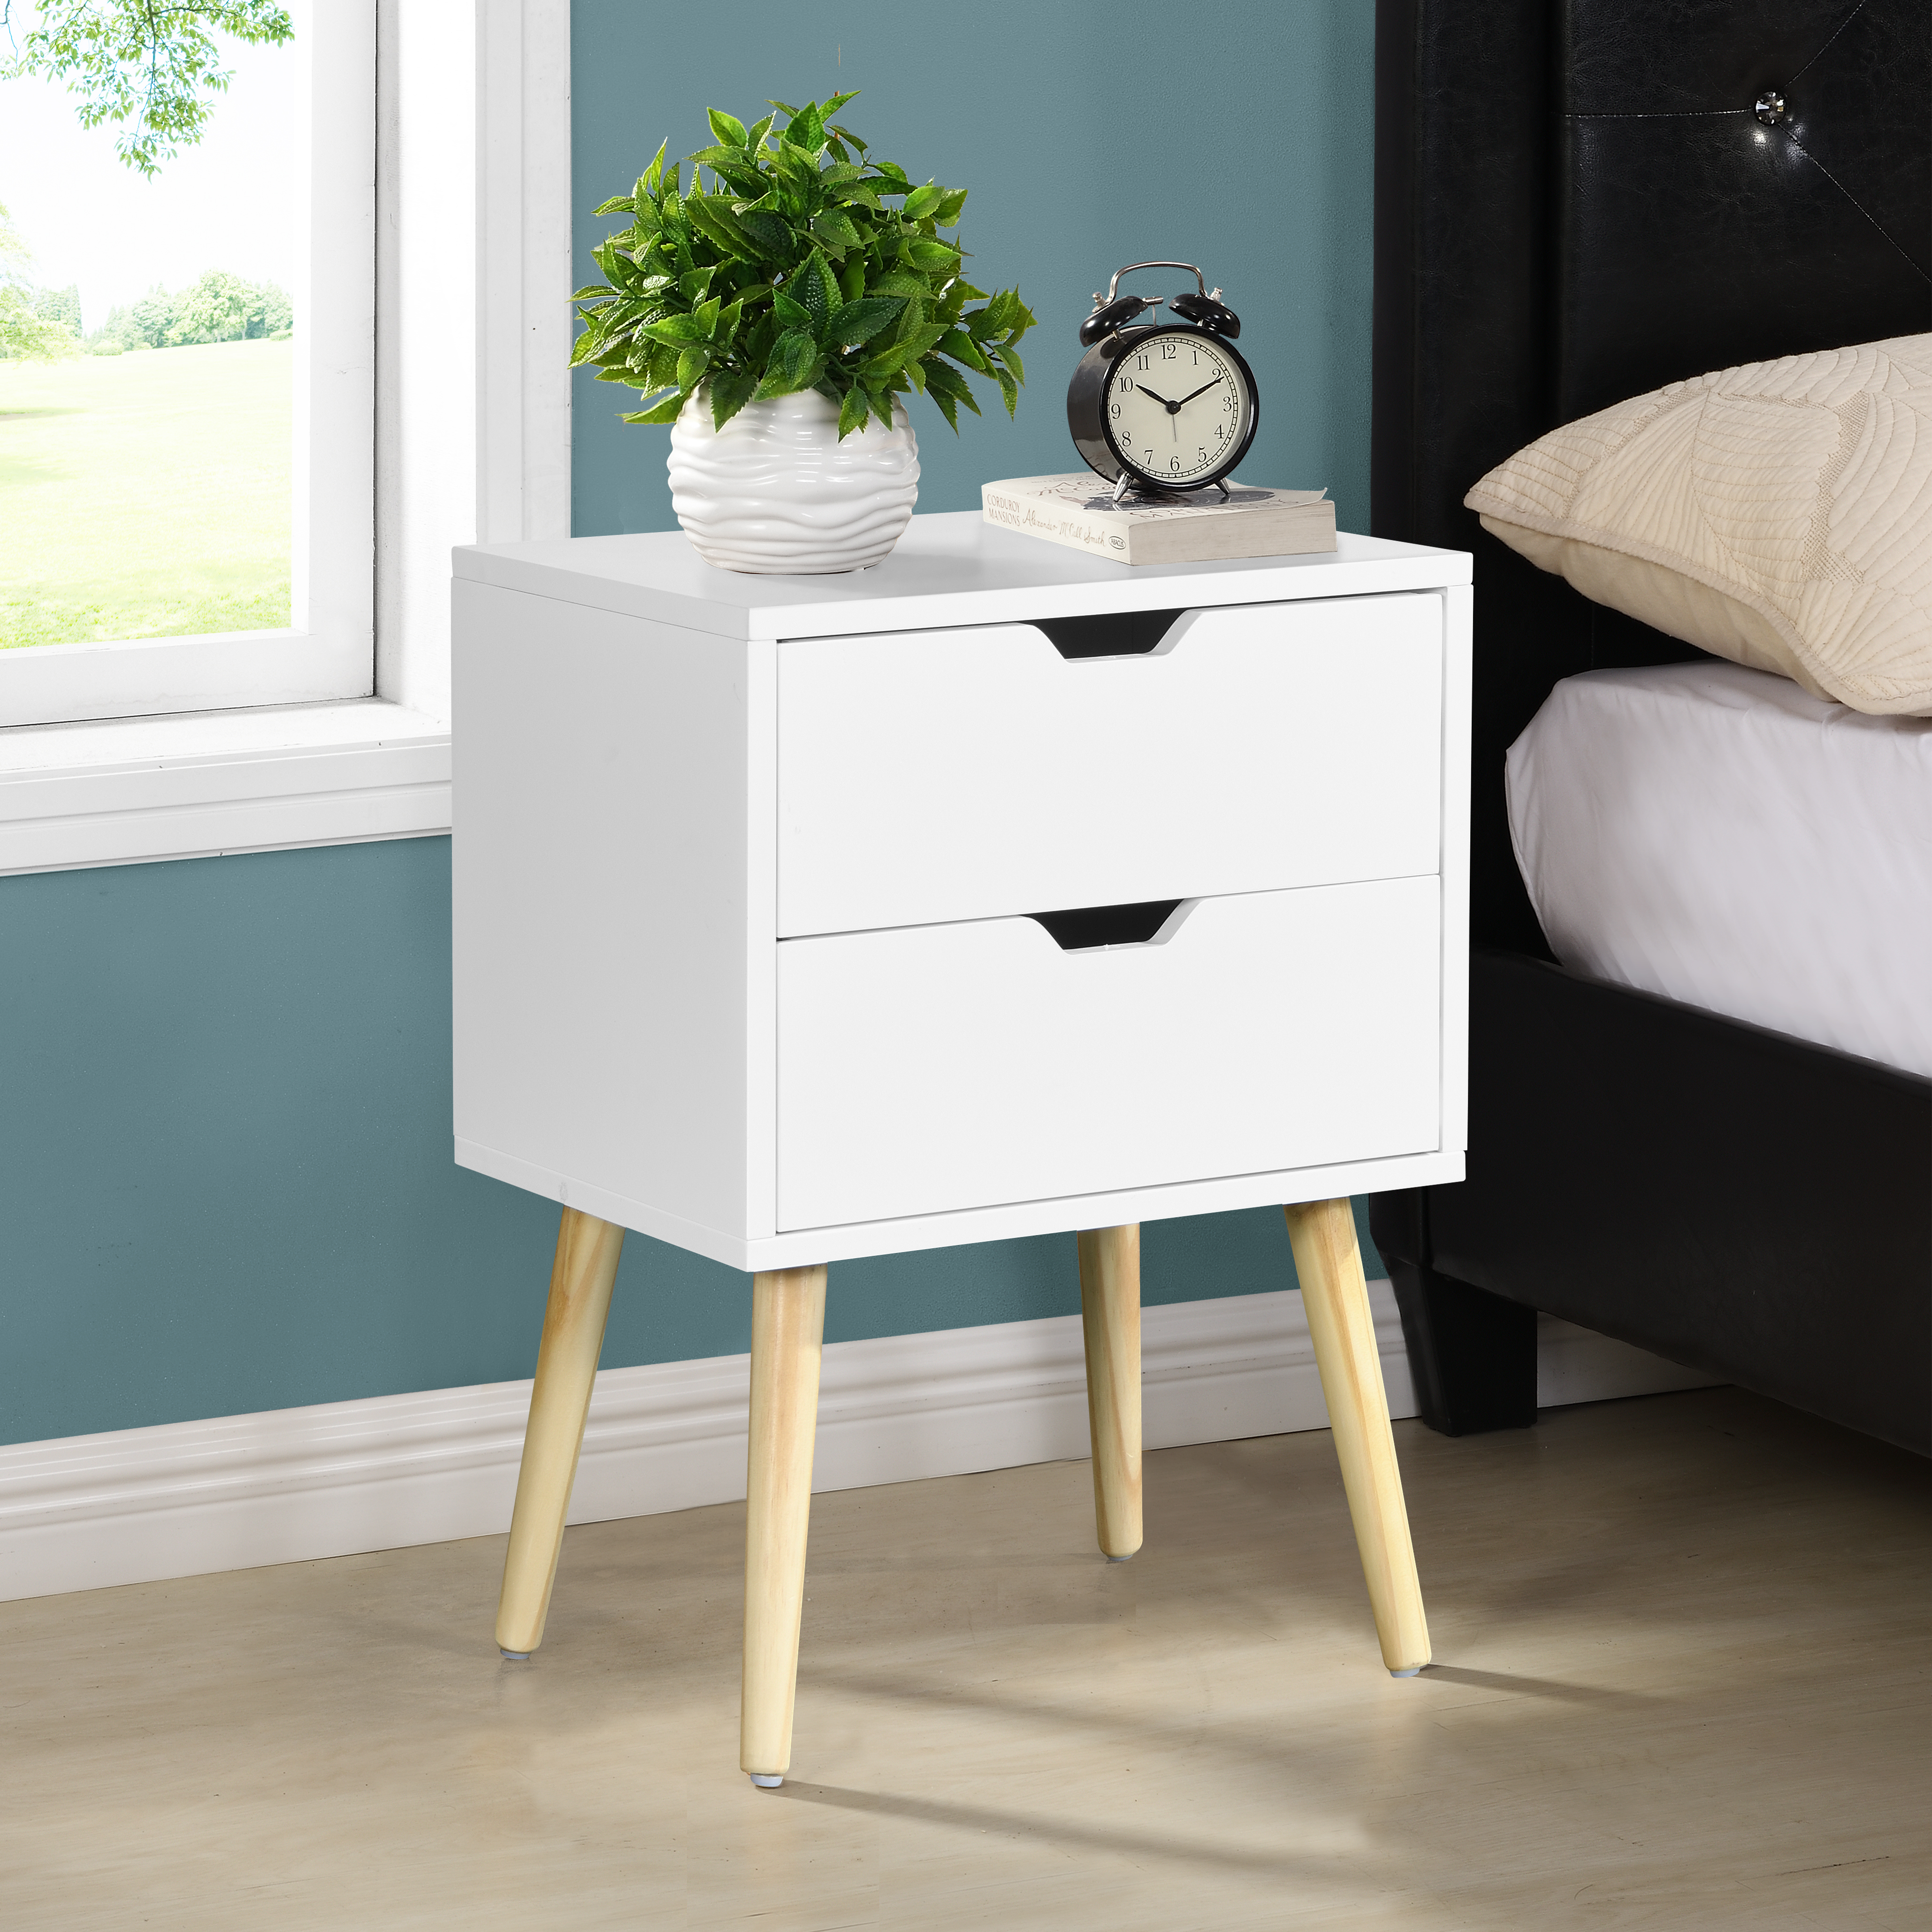 Side Table with 2 Drawer and Rubber Wood Legs, Mid-Century Modern Storage Cabinet for Bedroom Living Room Furniture, White-Boyel Living